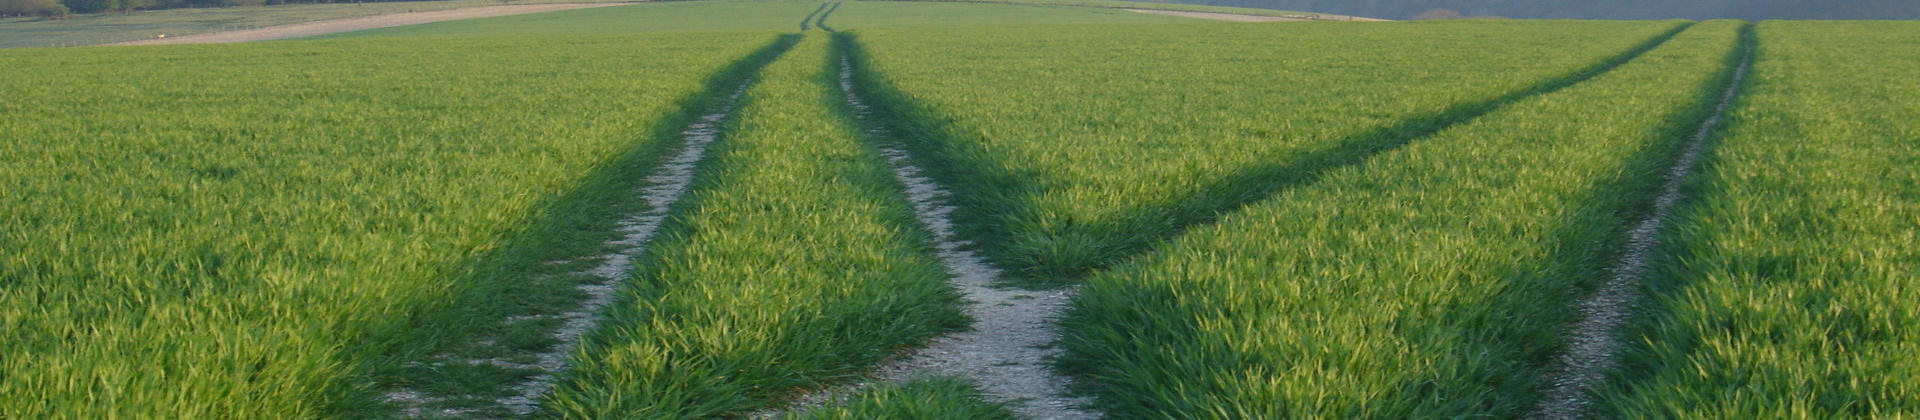 Picture of two tracks through a field